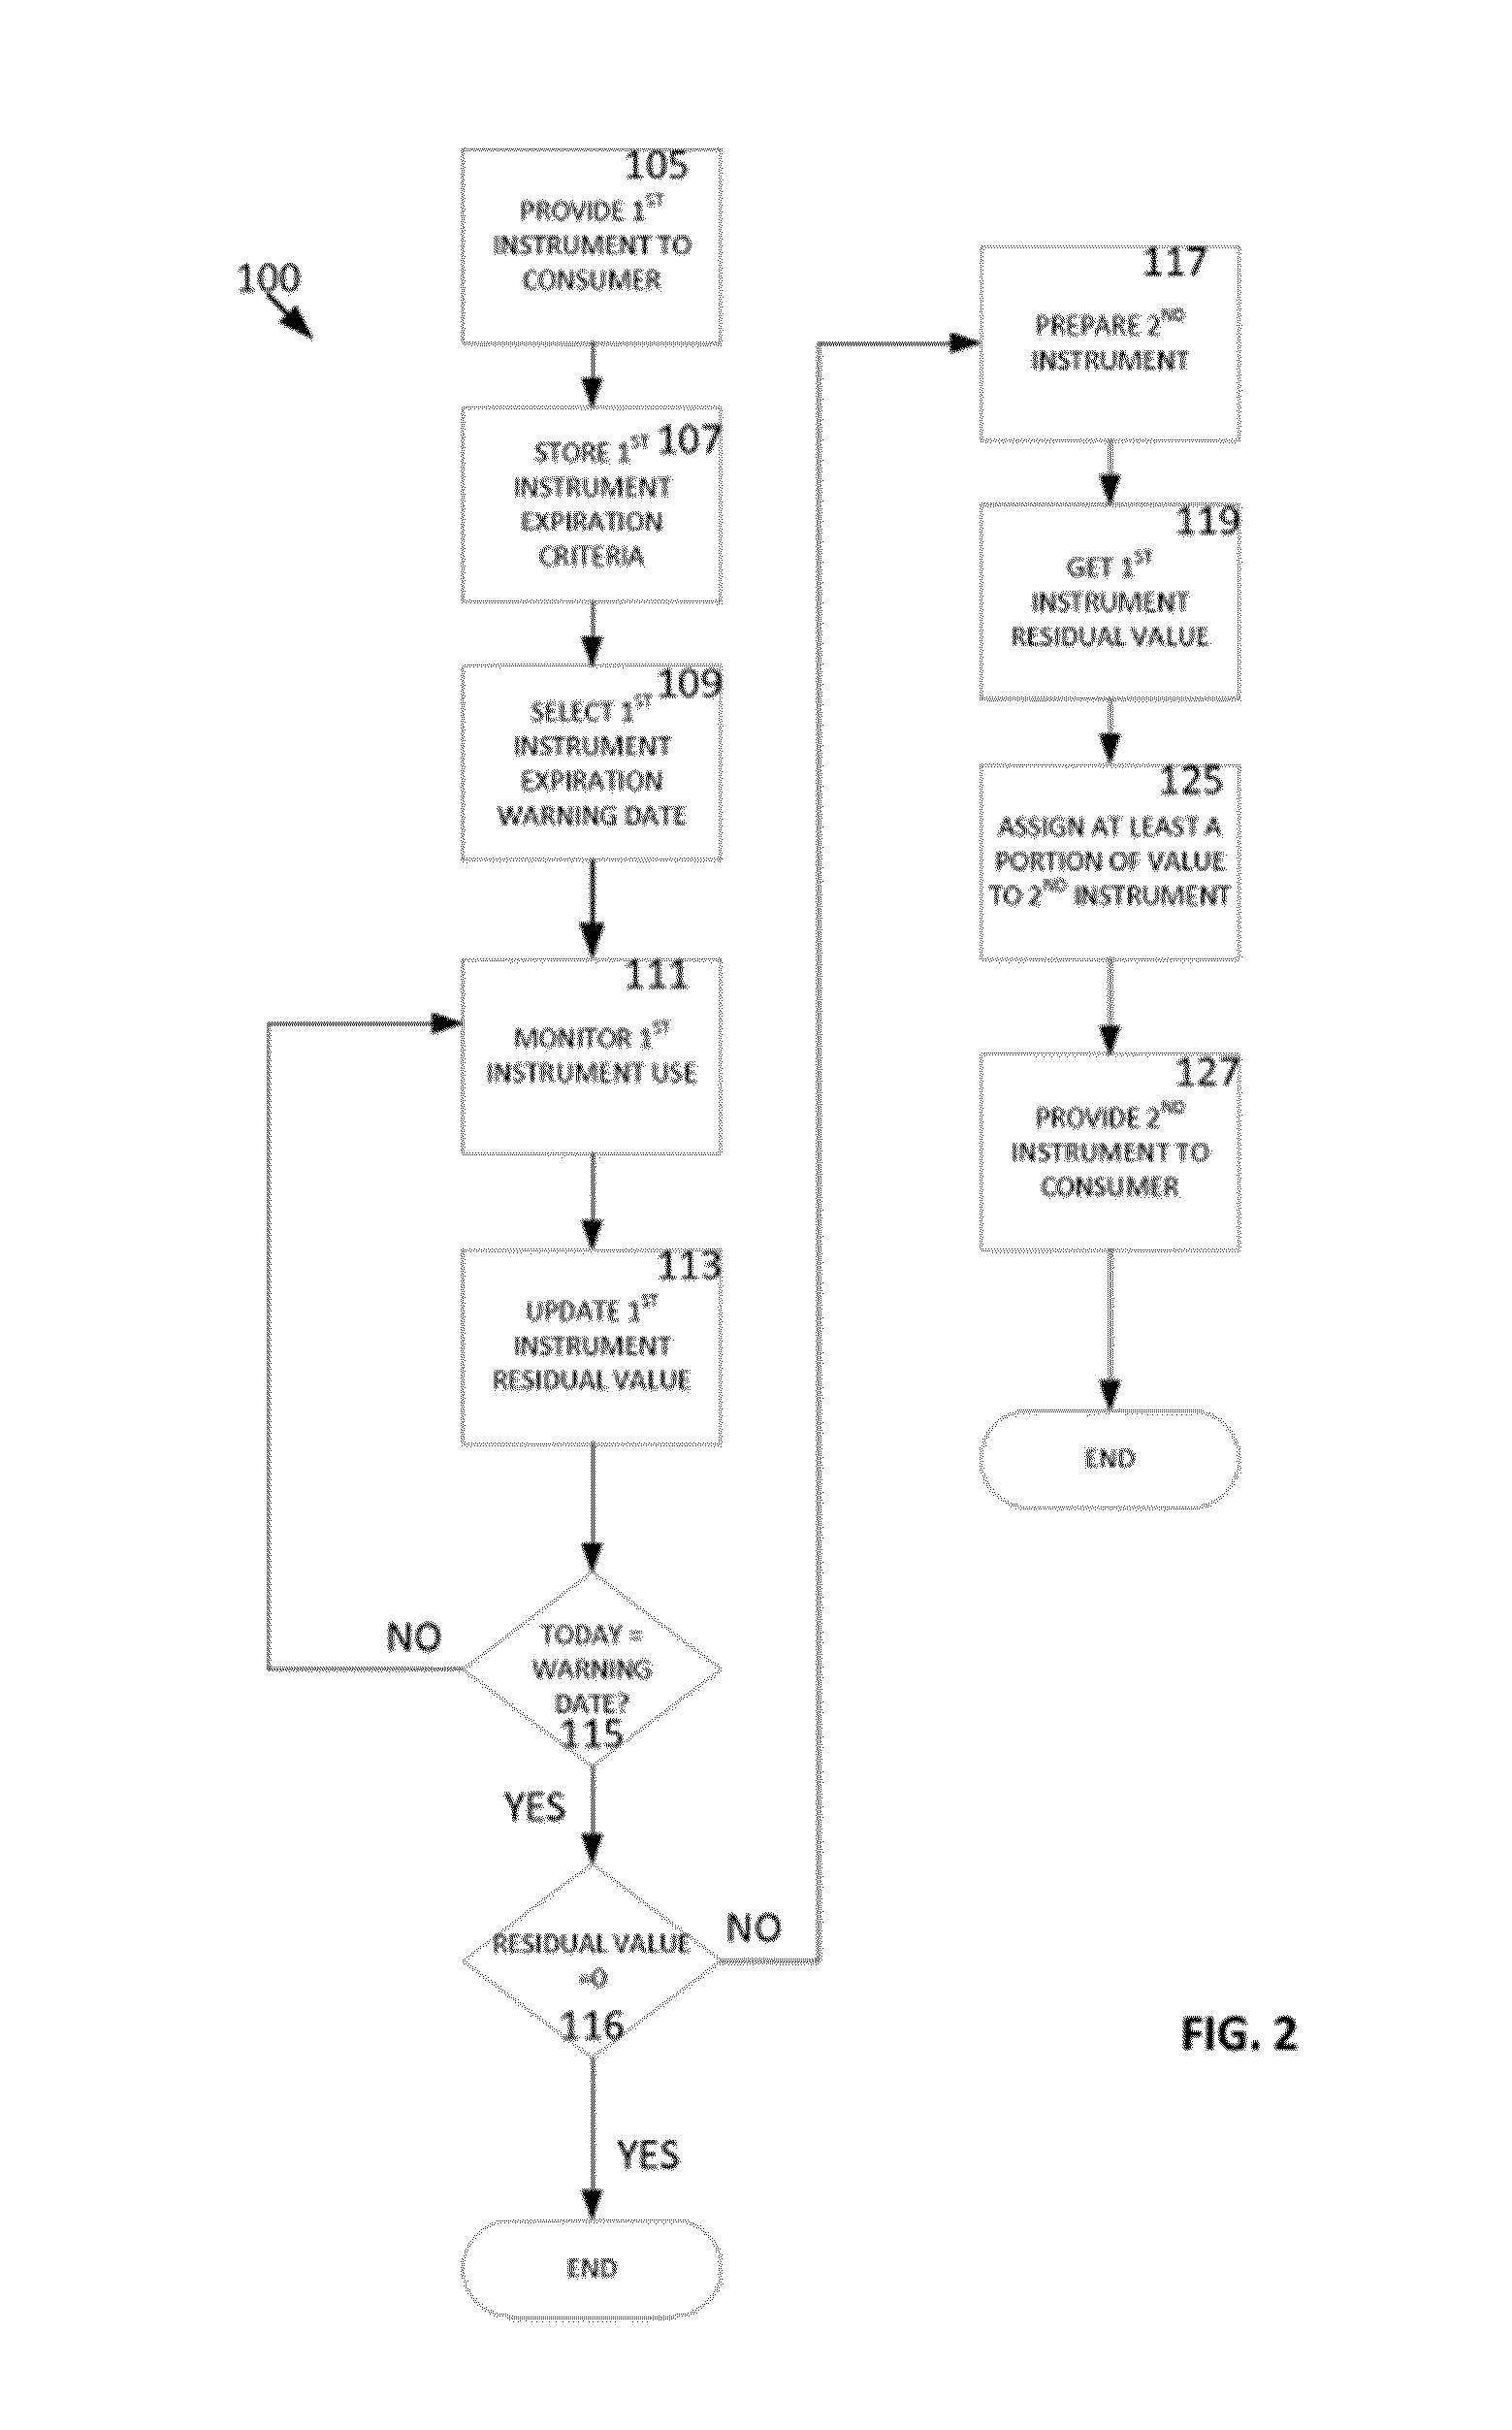 Systems and methods for provisioning rebate instruments